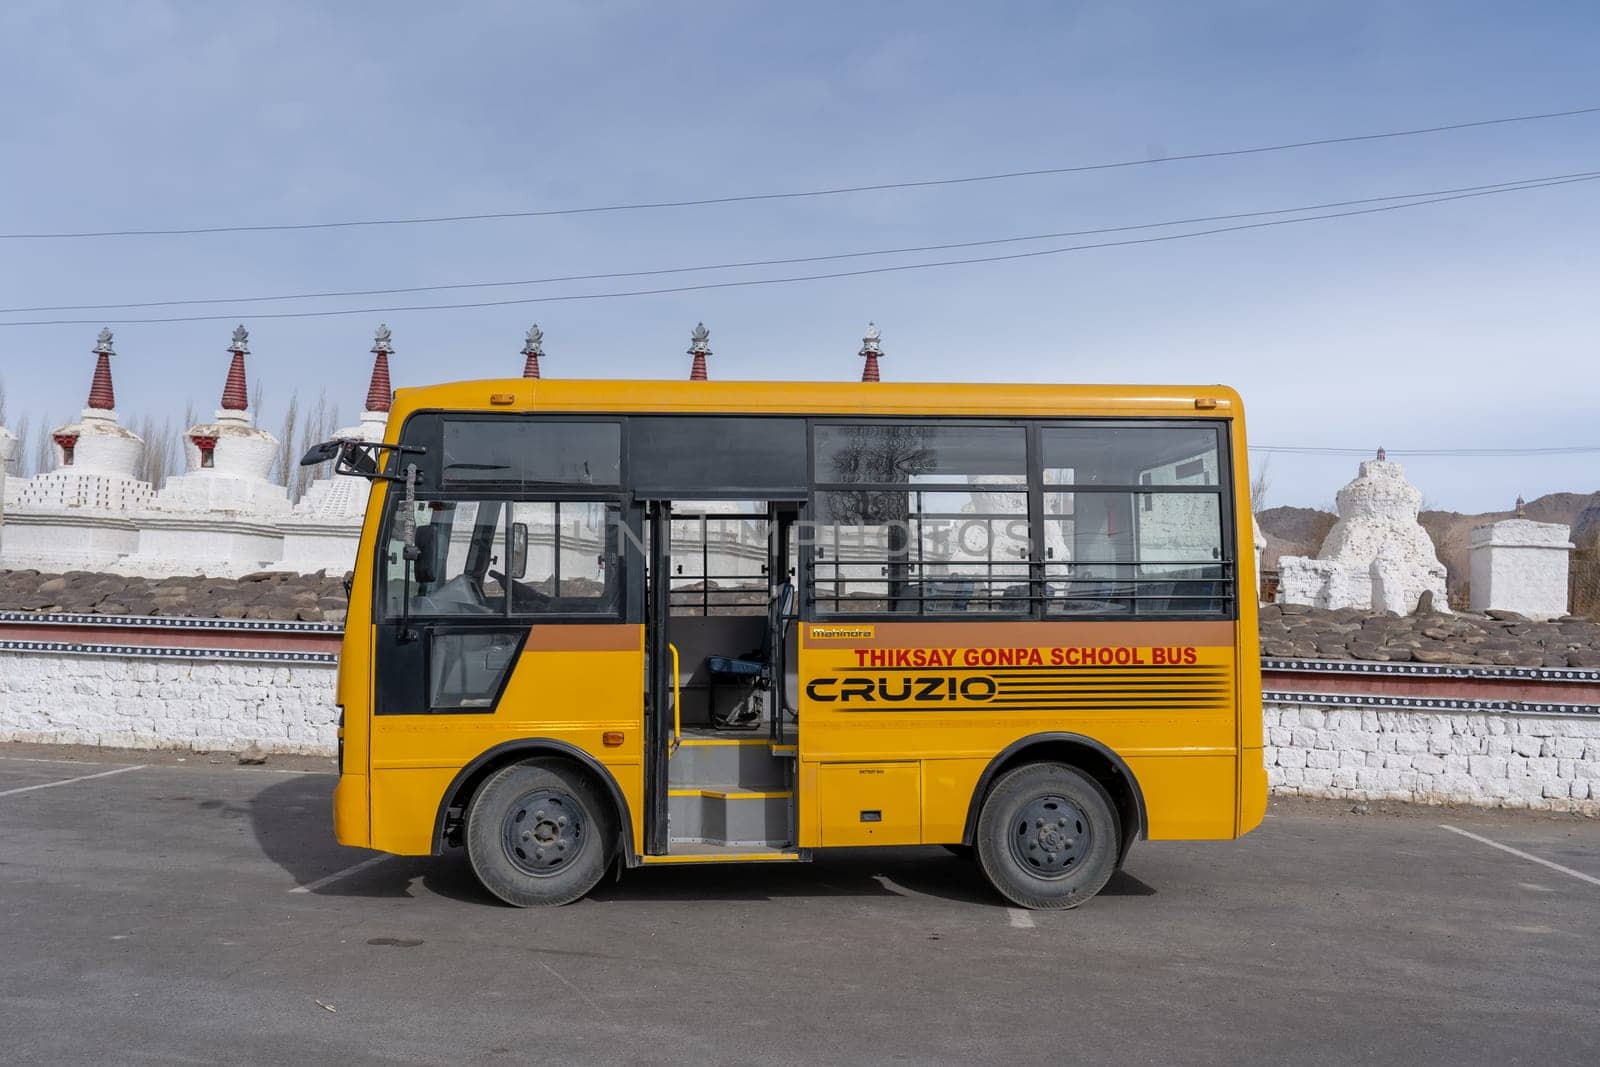 Yellow School Bus in Thiksey, India by oliverfoerstner